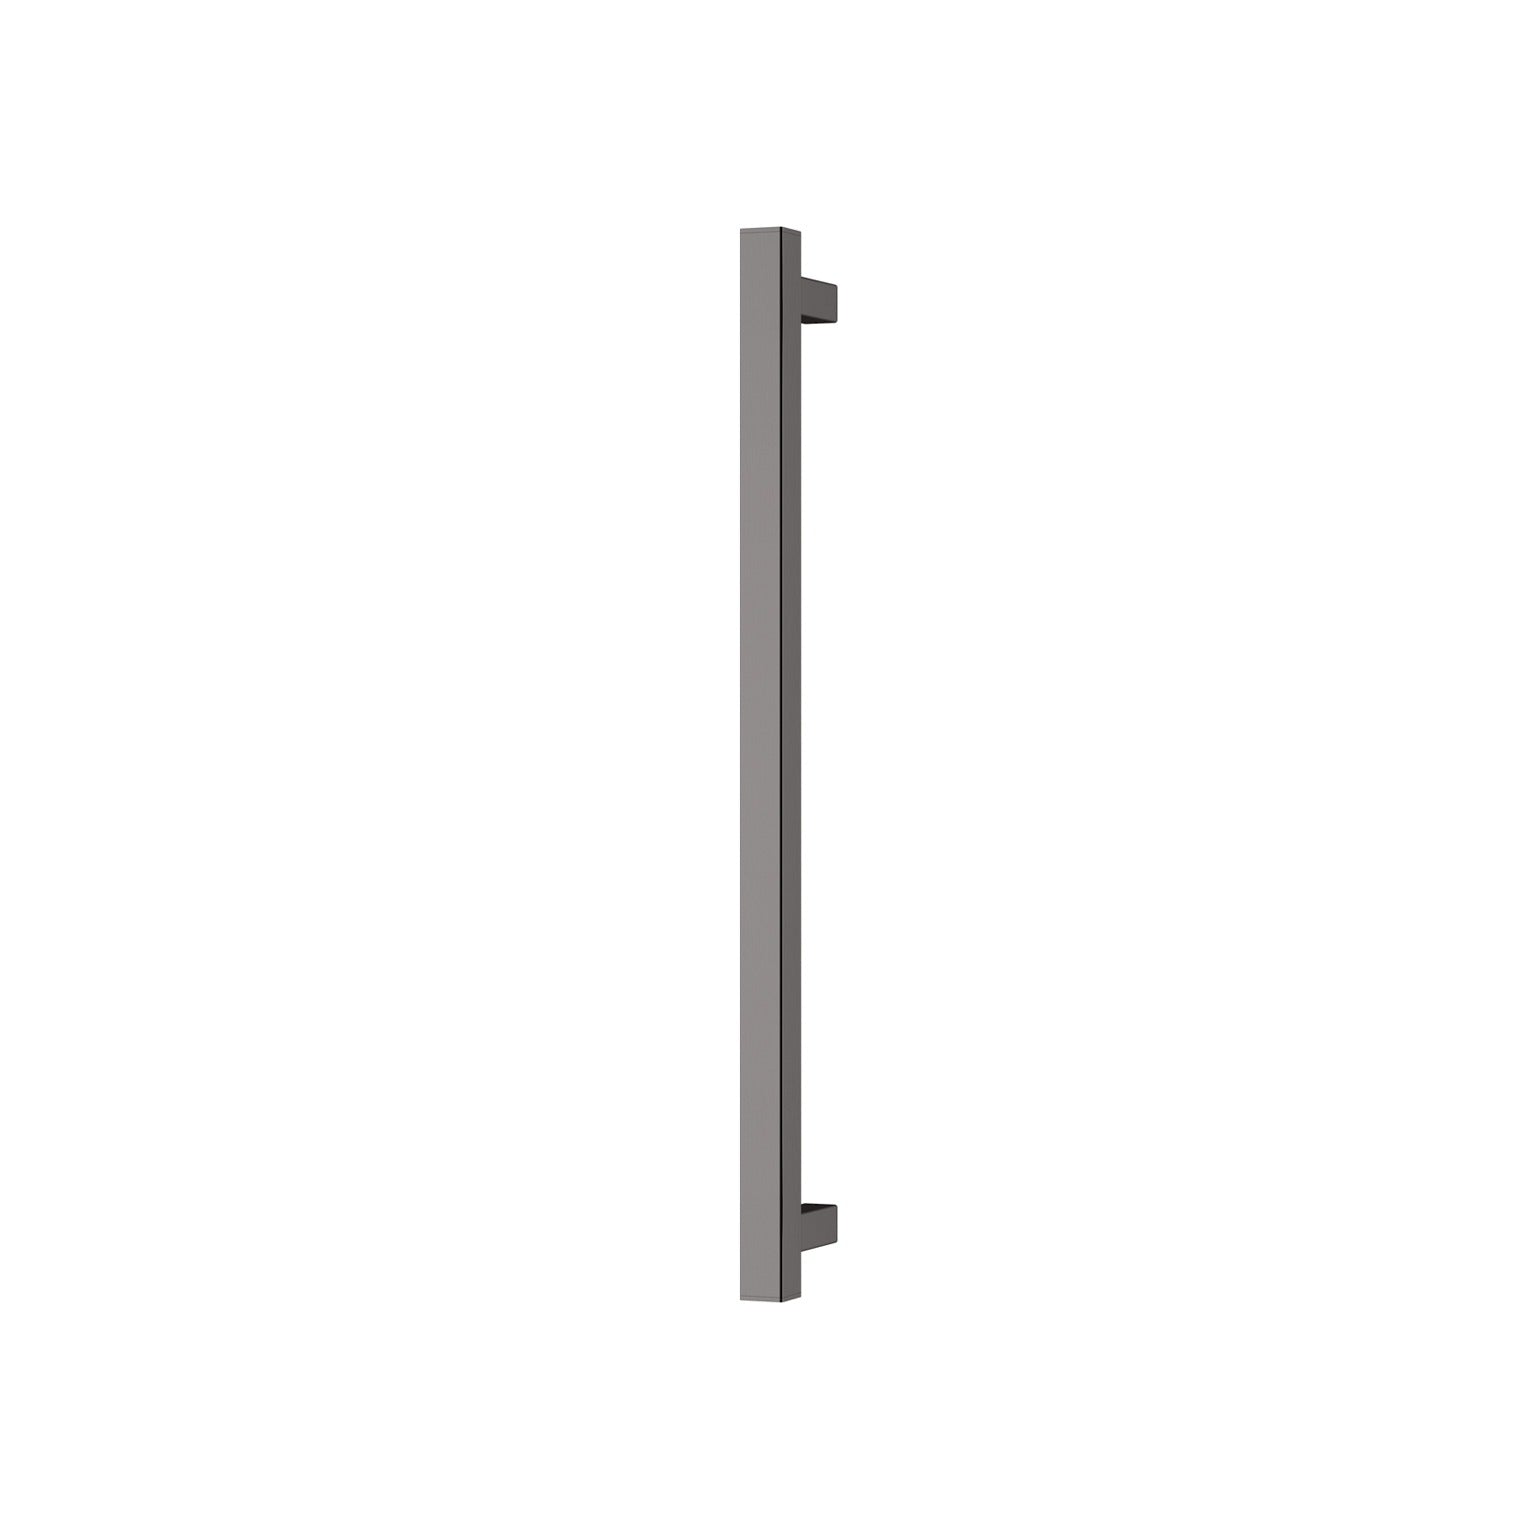 PHOENIX SQUARE SINGLE HEATED TOWEL RAIL BRUSHED CARBON (AVAILABLE IN 600MM AND 800MM)